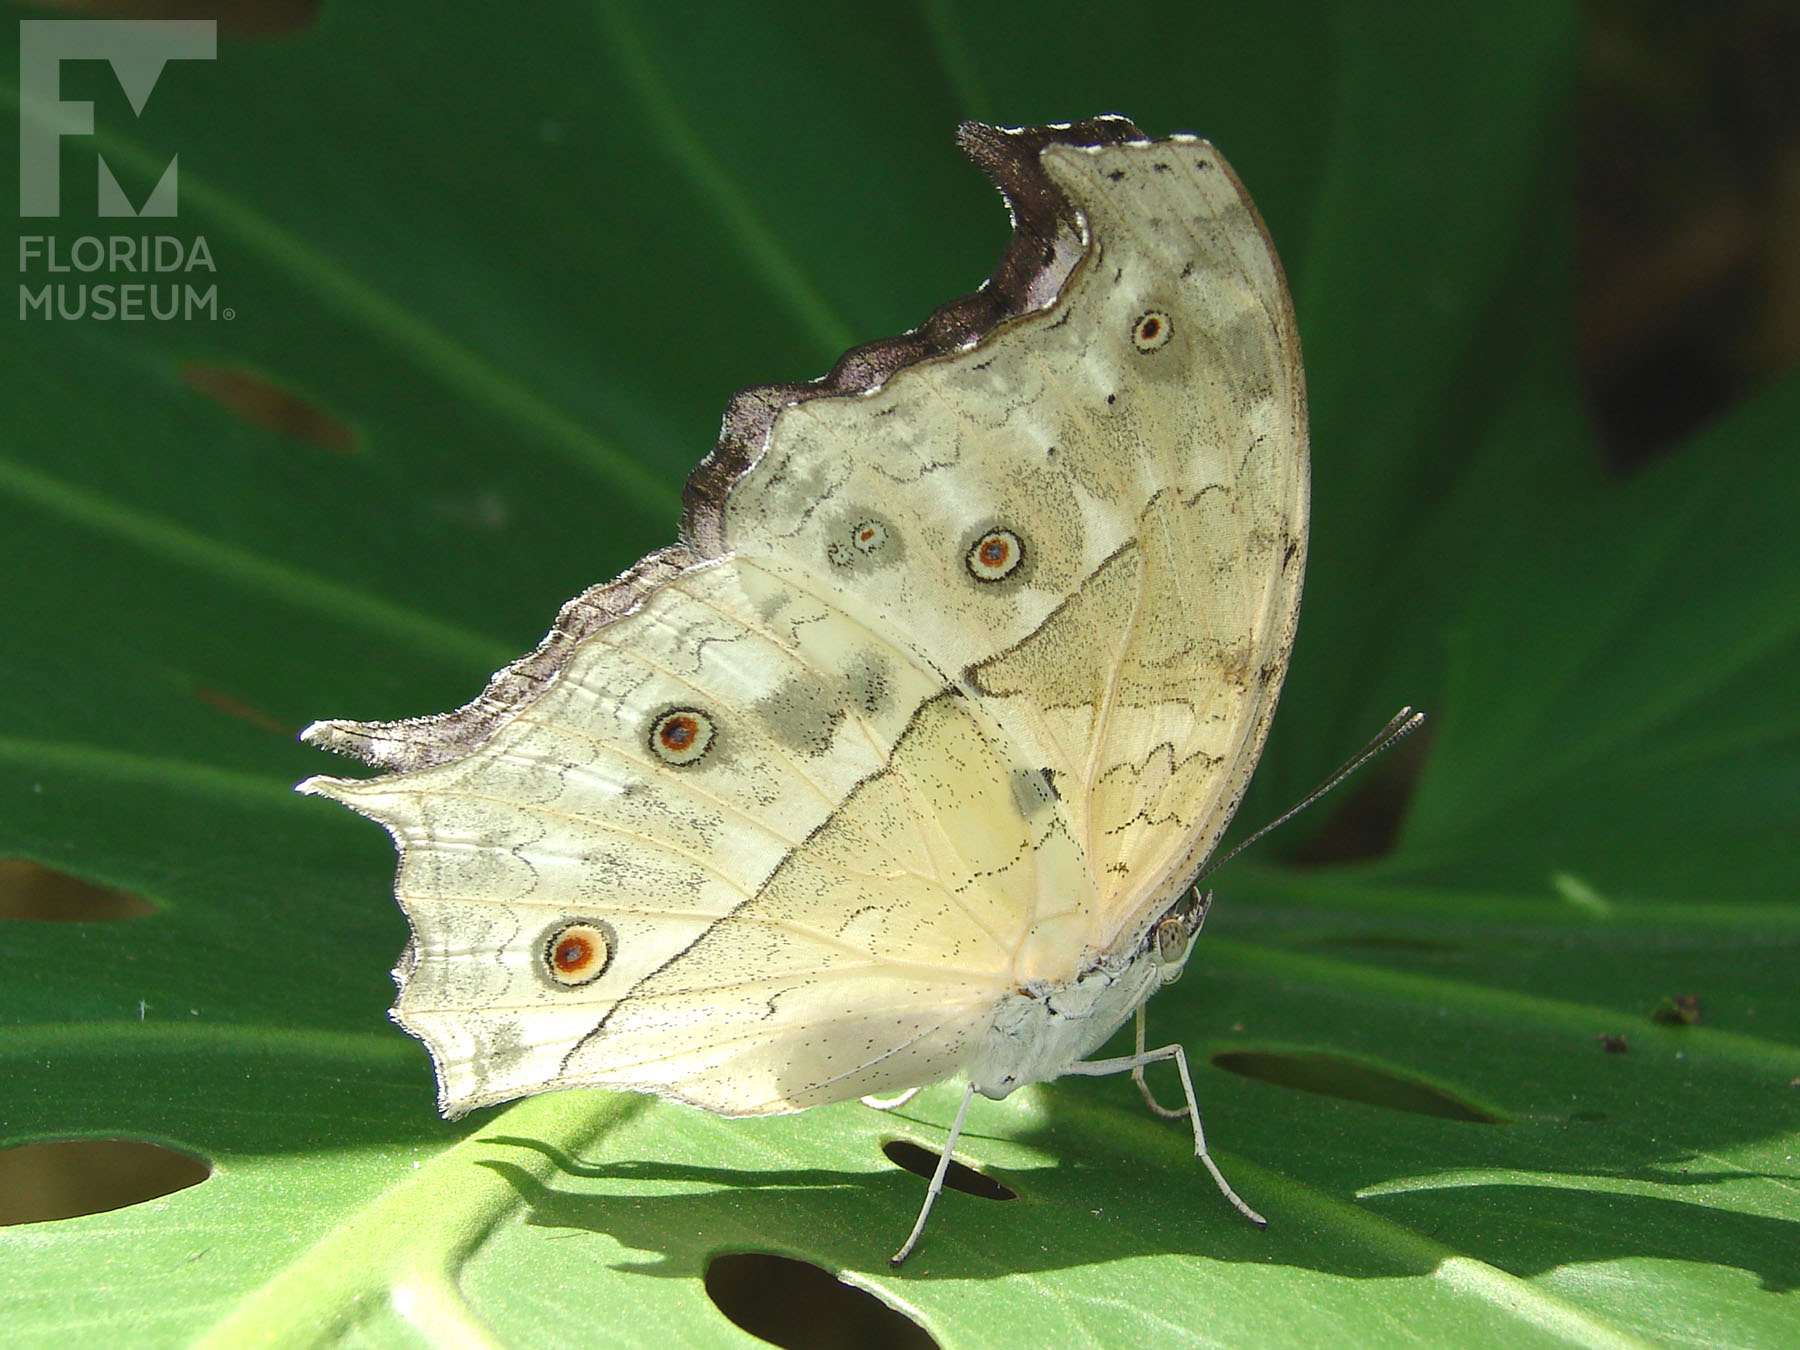 Forest Mother-of-Pearl – Exhibits